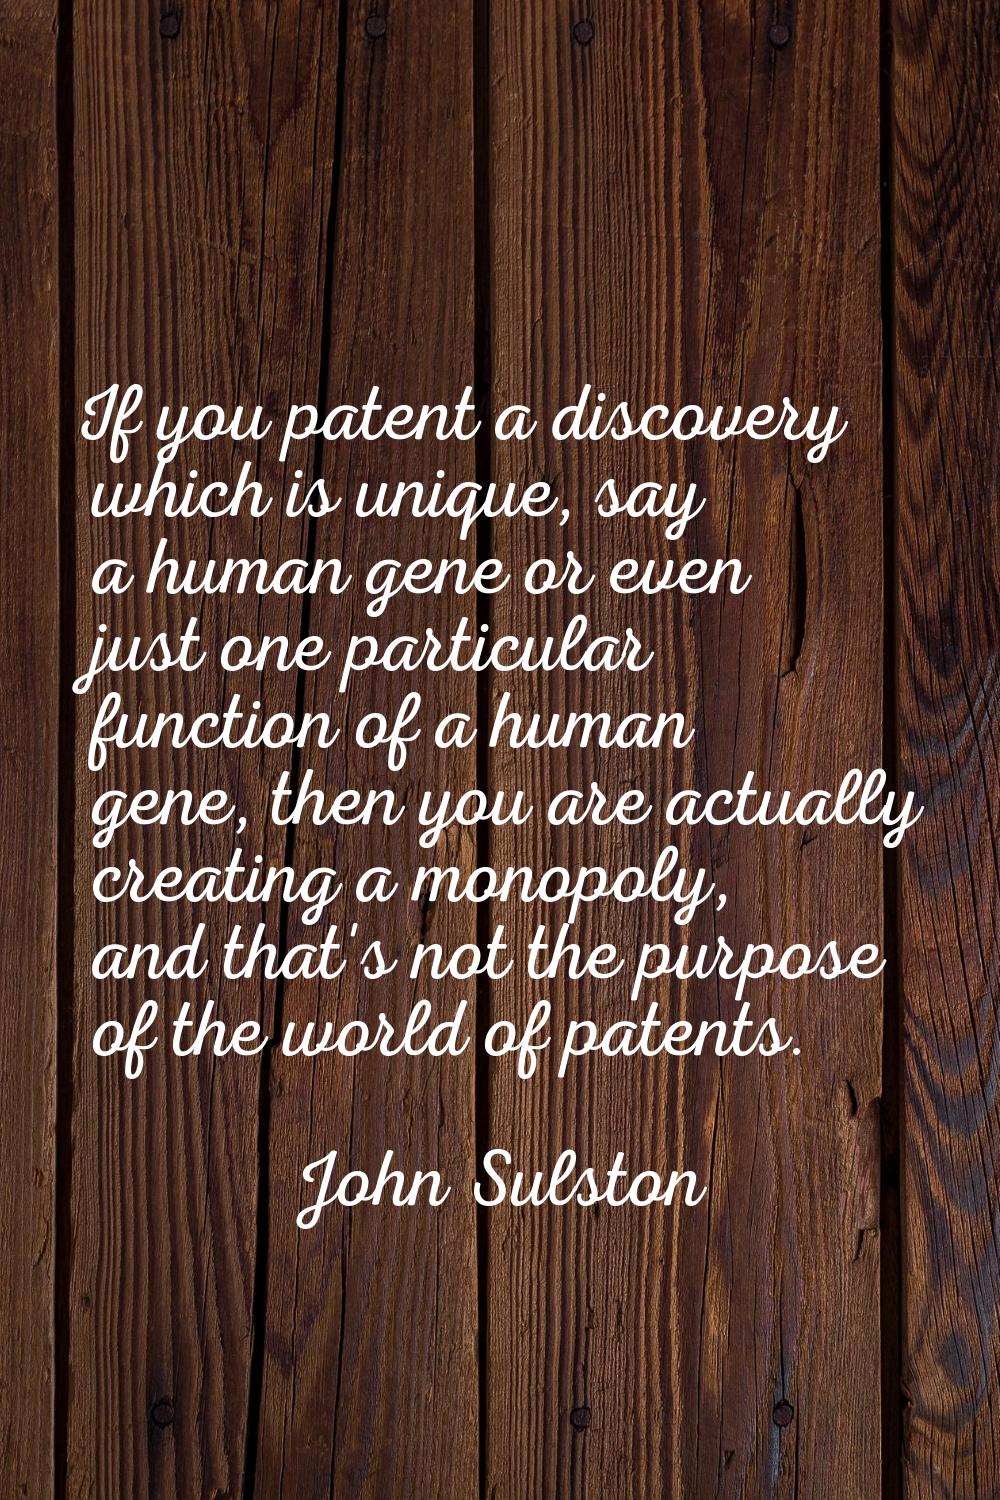 If you patent a discovery which is unique, say a human gene or even just one particular function of